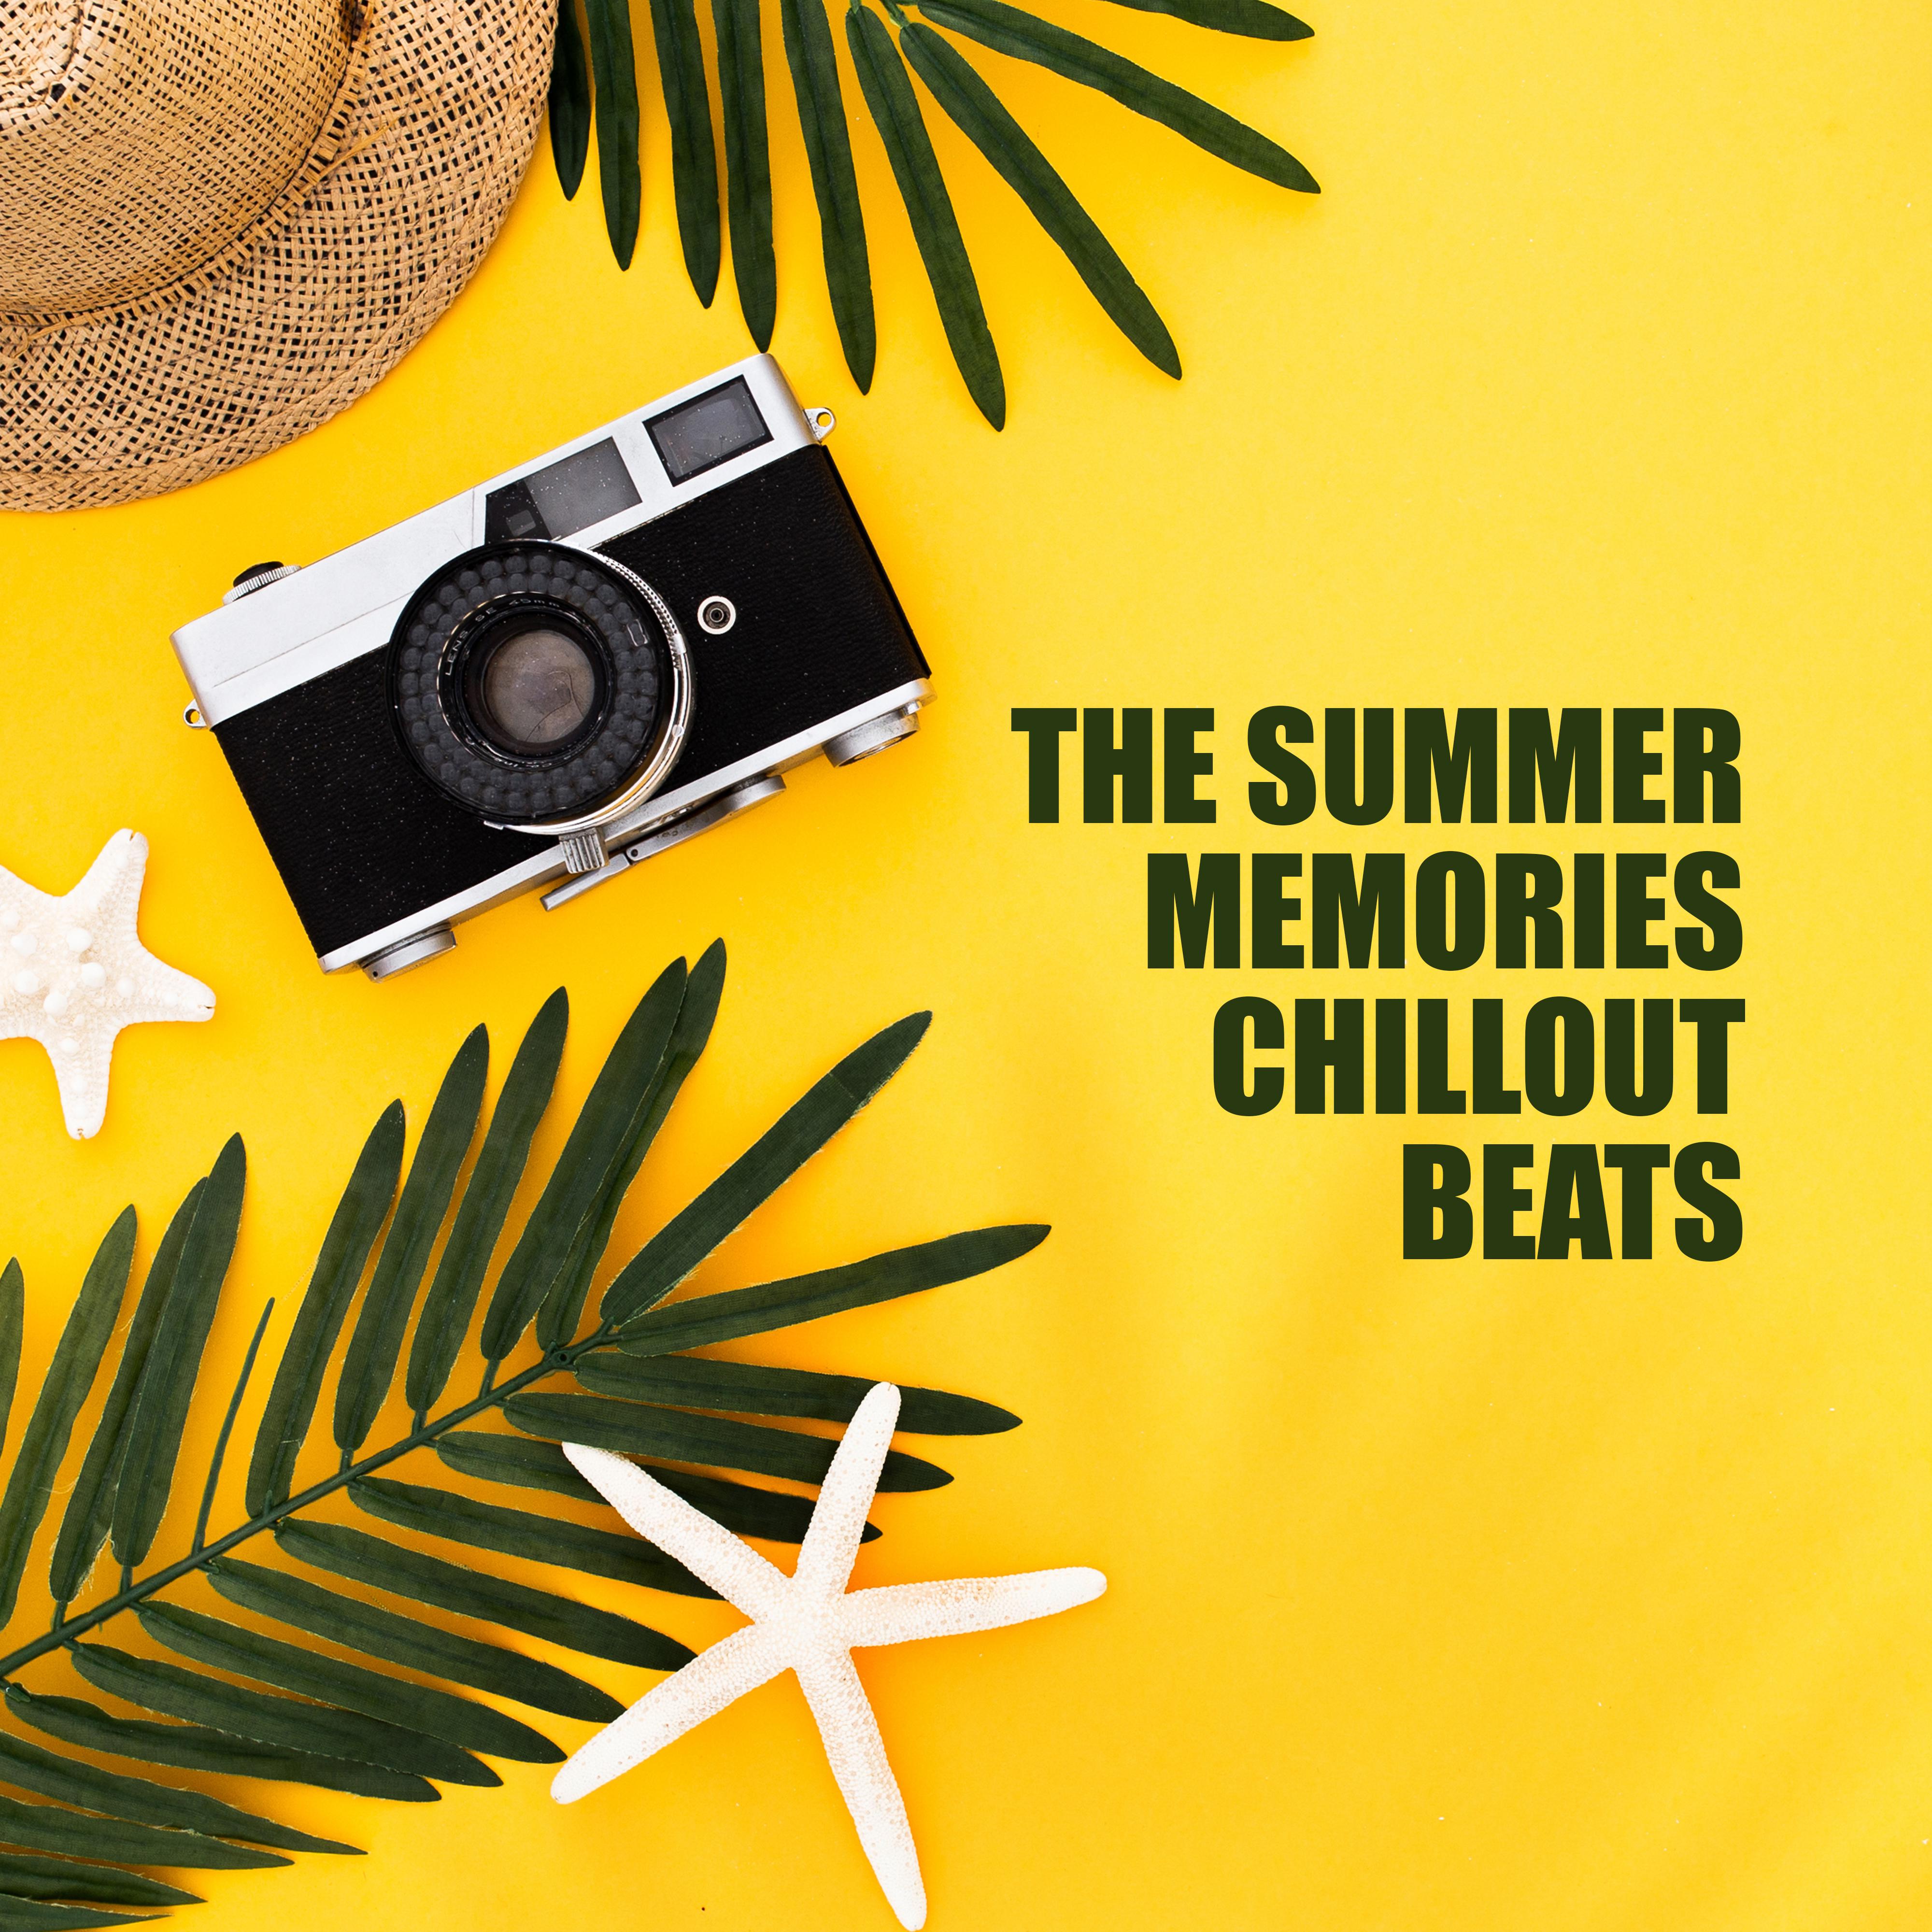 The Summer Memories Chillout Beats: Compilation of Holiday Chill Out Music for Best Relaxation Experience, Beach Vibes, Electronic Slow Songs